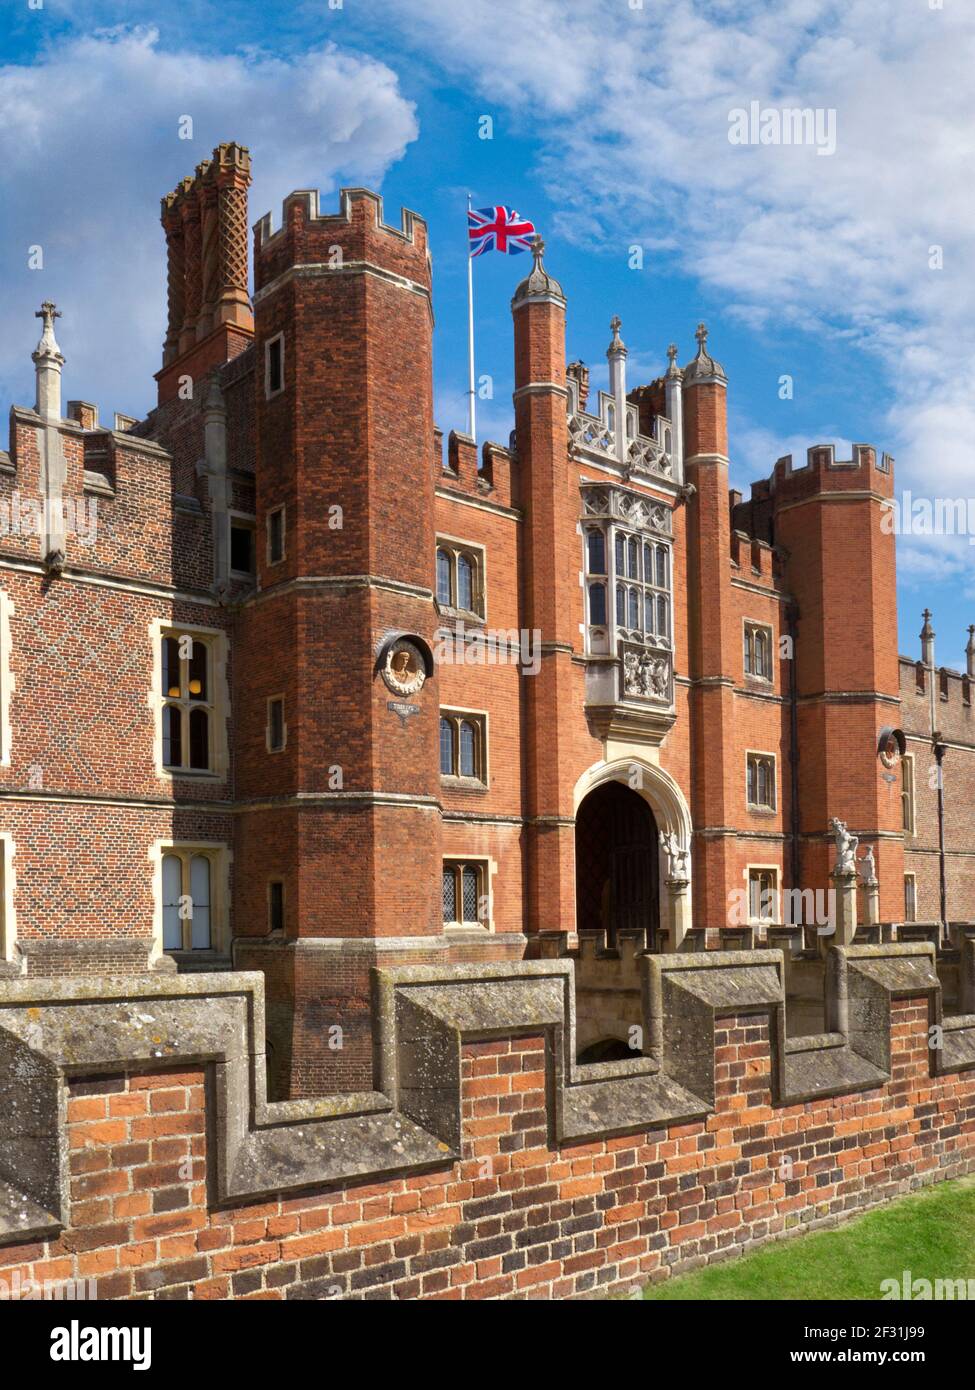 Hampton Court Palace flying the Union Jack flag. A royal palace in the London Borough of Richmond upon Thames Greater London Surrey UK Stock Photo